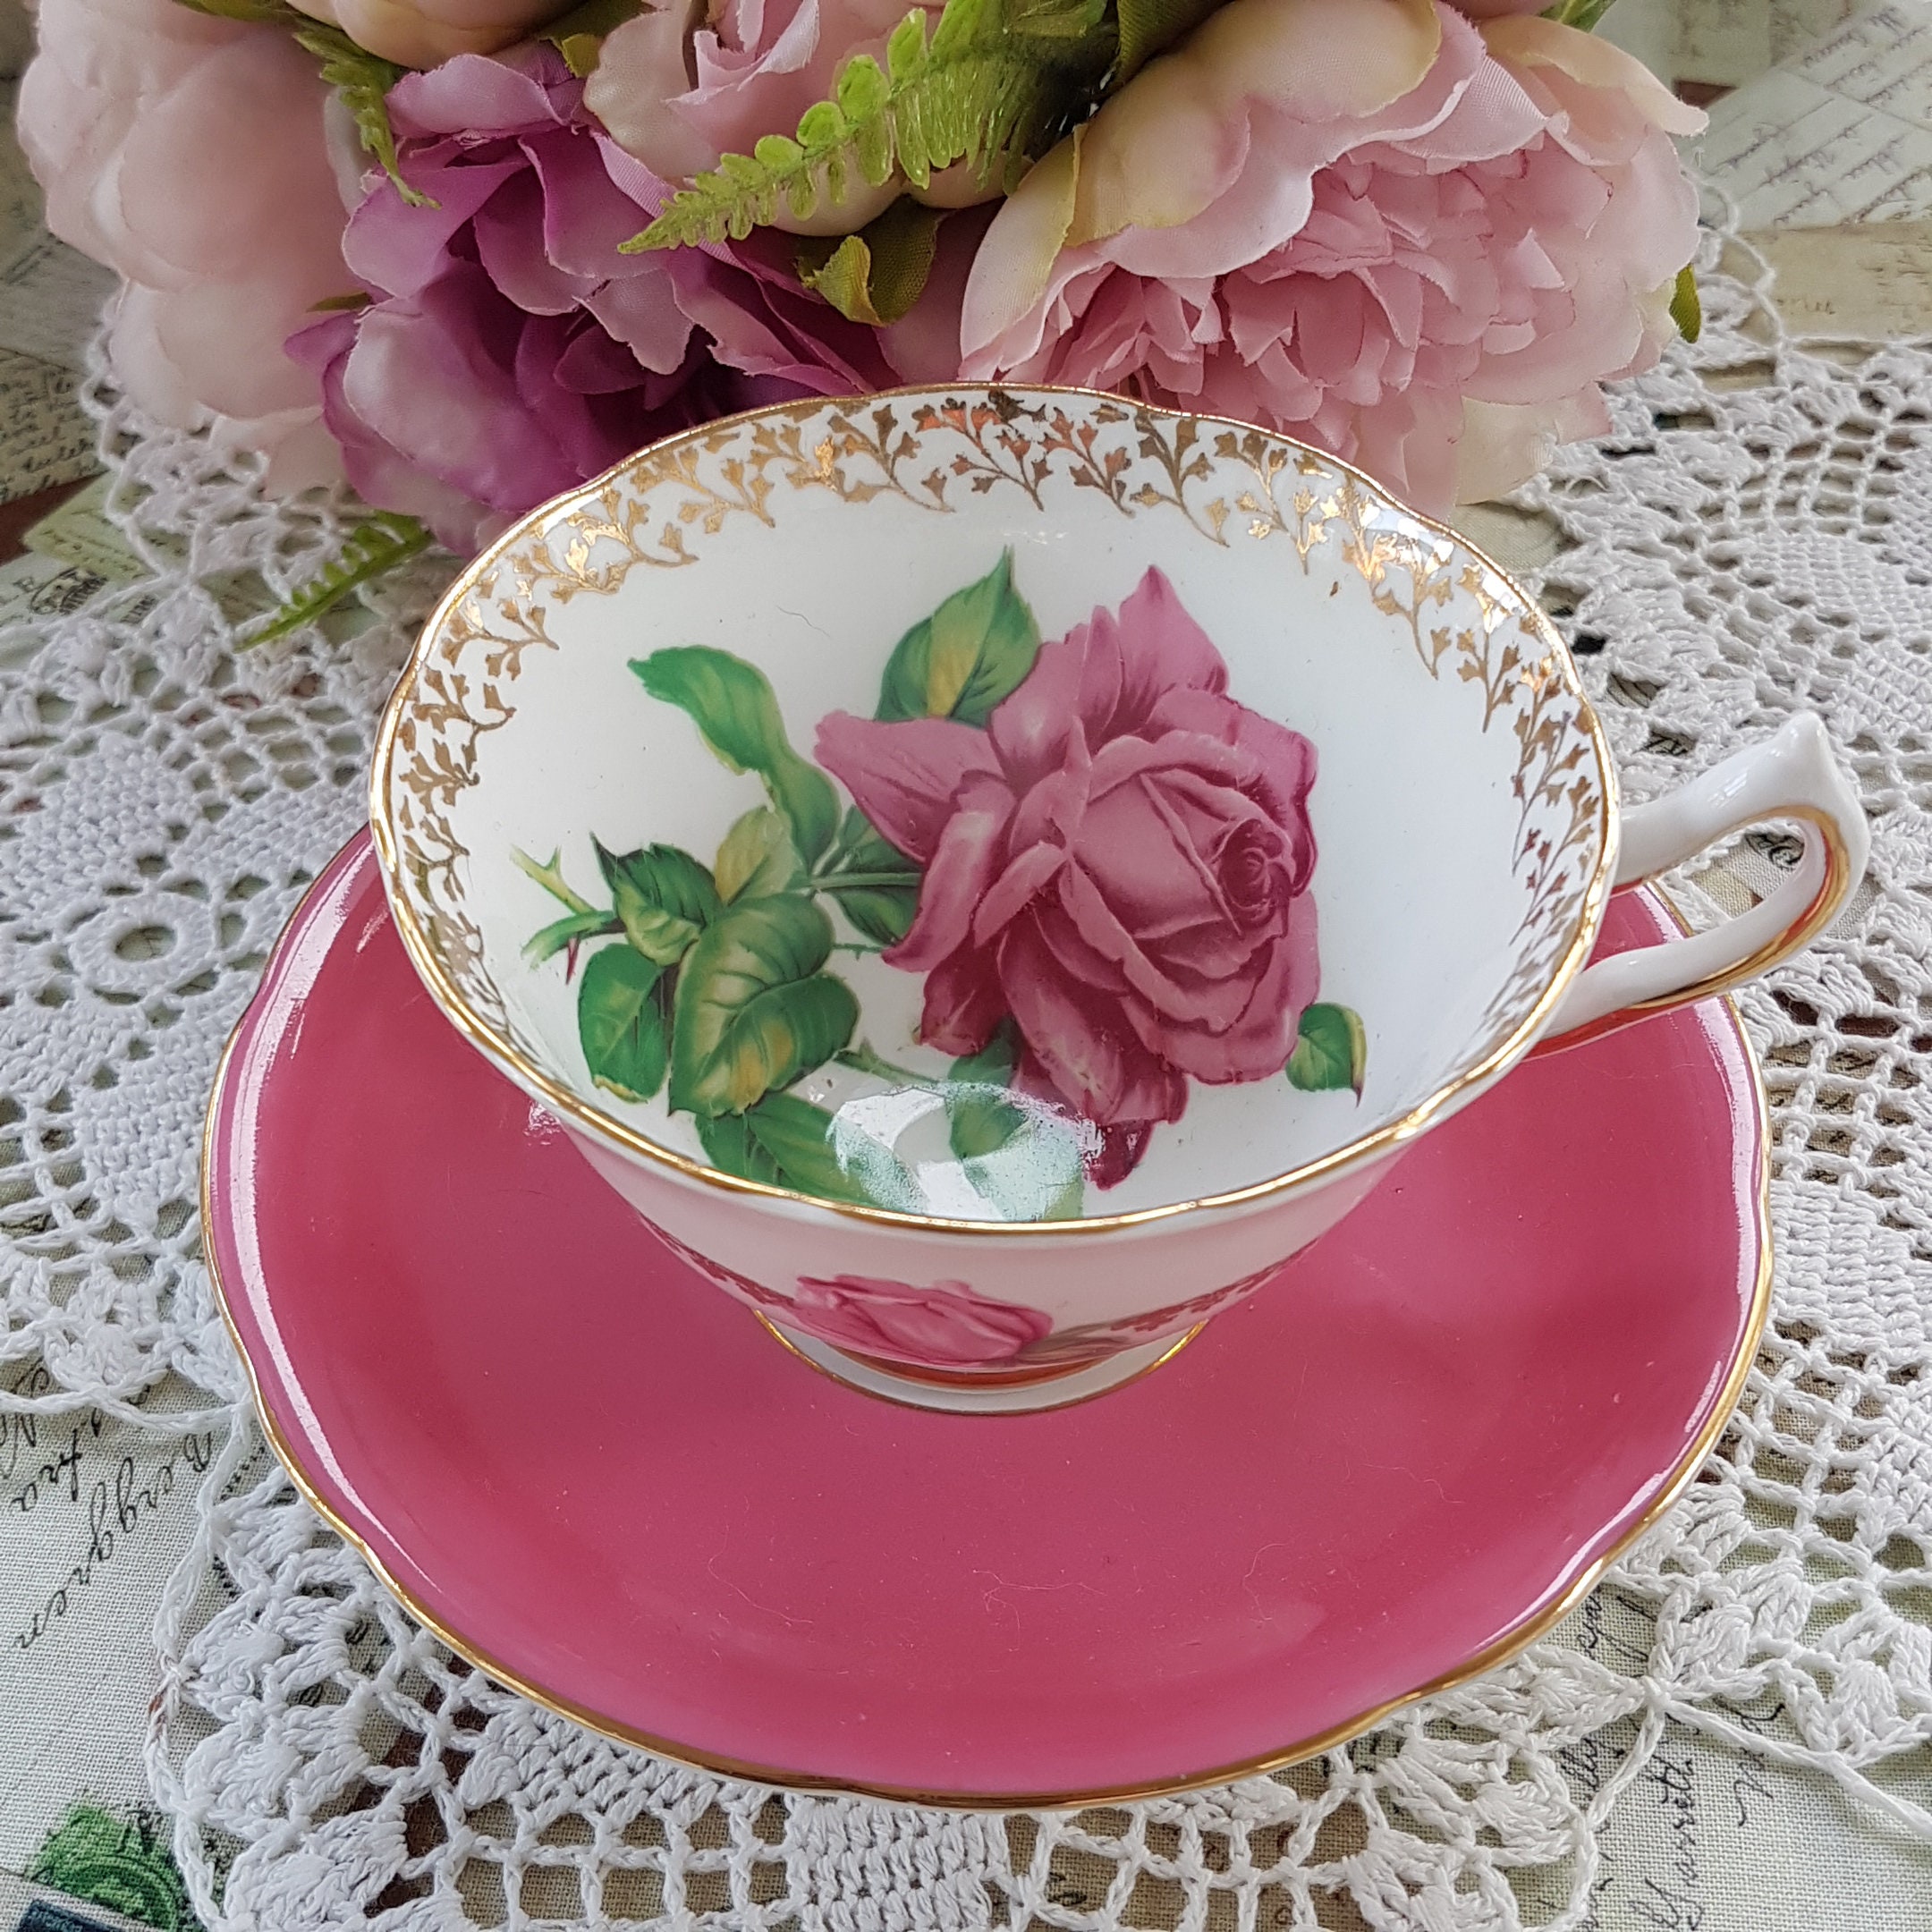 Mismatched Tea Cup And Saucer Duo Pink Aynsley Saucer Collingwoods Tudor Rose Tea Cup Shabby 